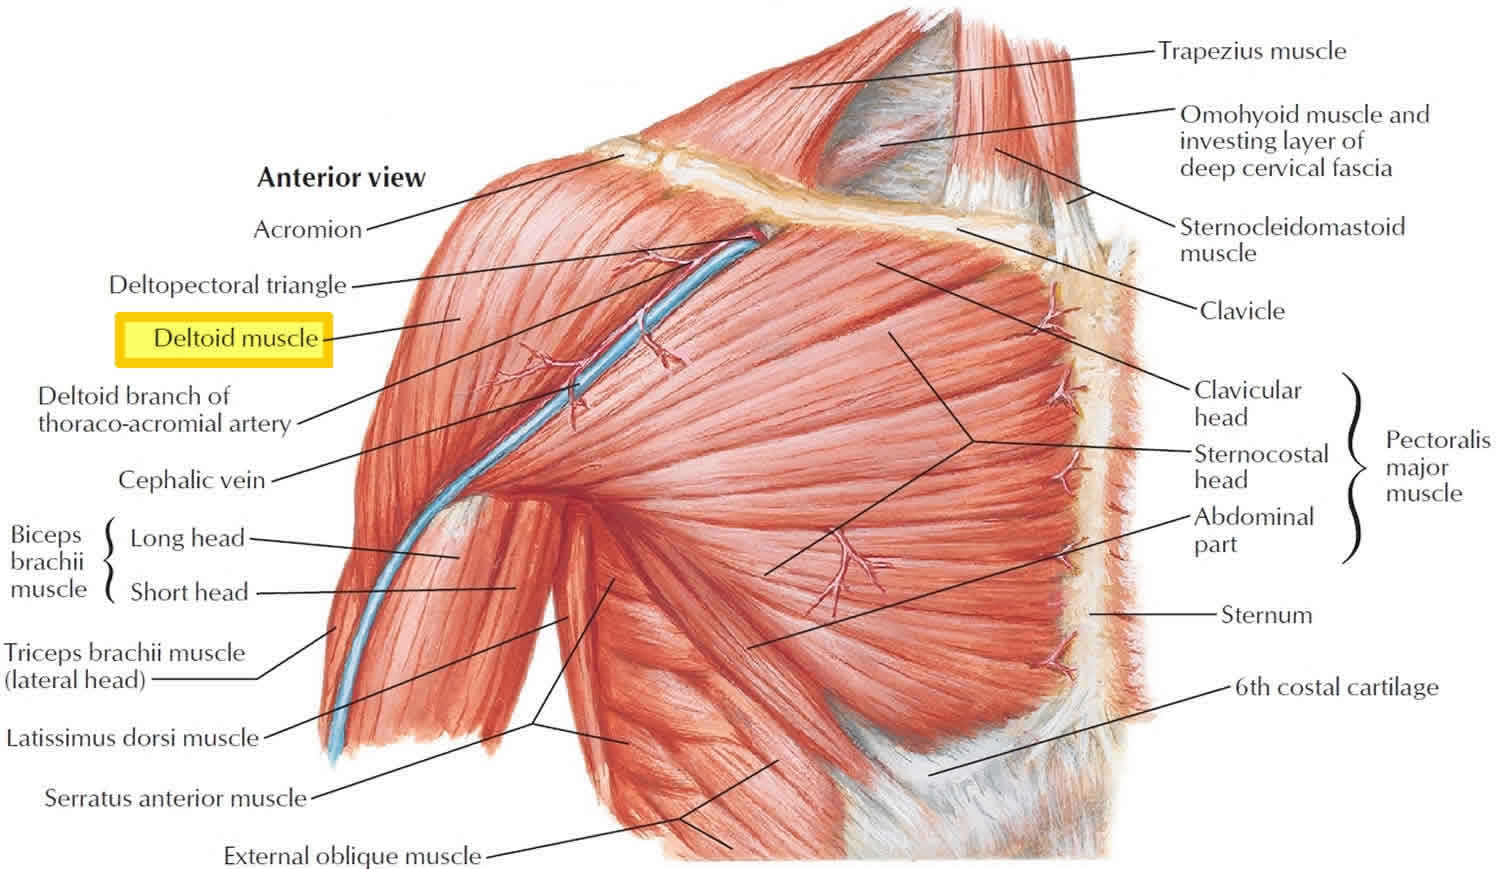 Deltoid muscle anatomy, fibers, function and action of the deltoid muscle